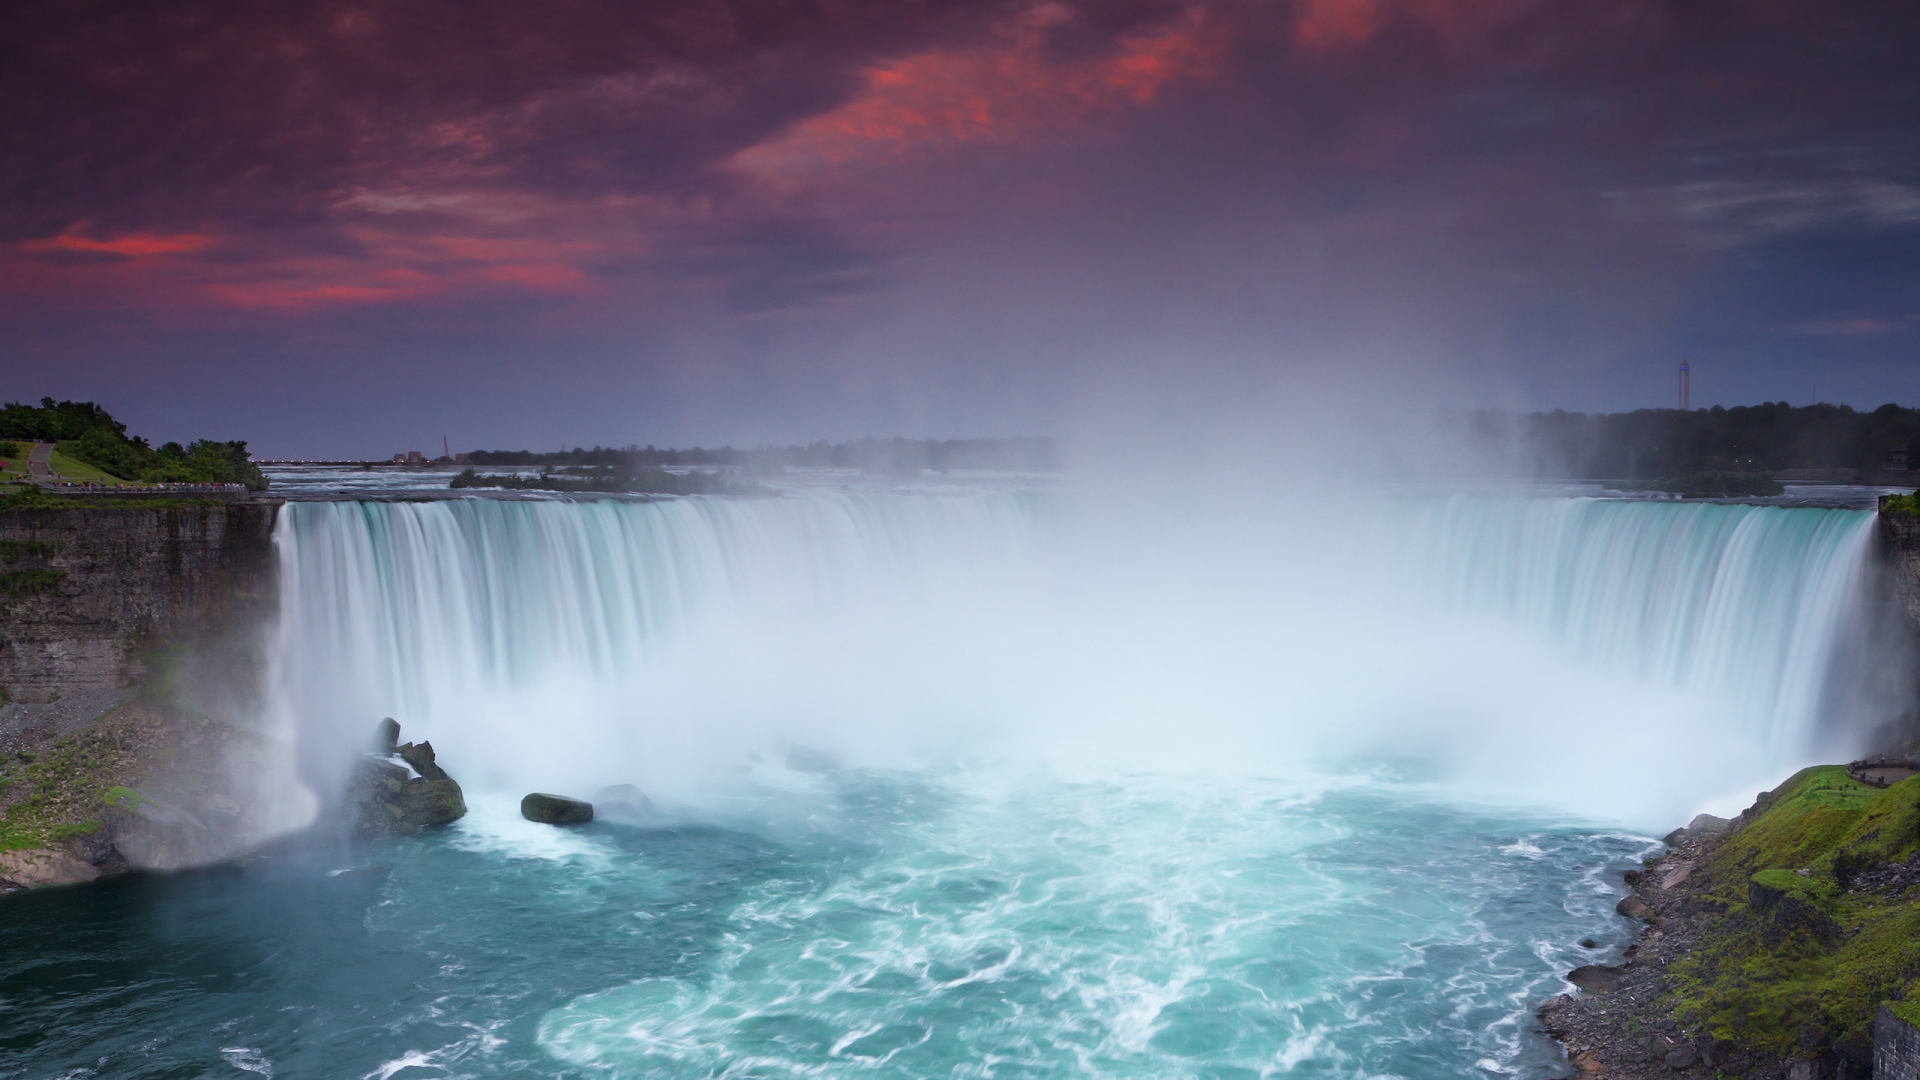 The Falls at Sunset for 1920 x 1080 HDTV 1080p resolution